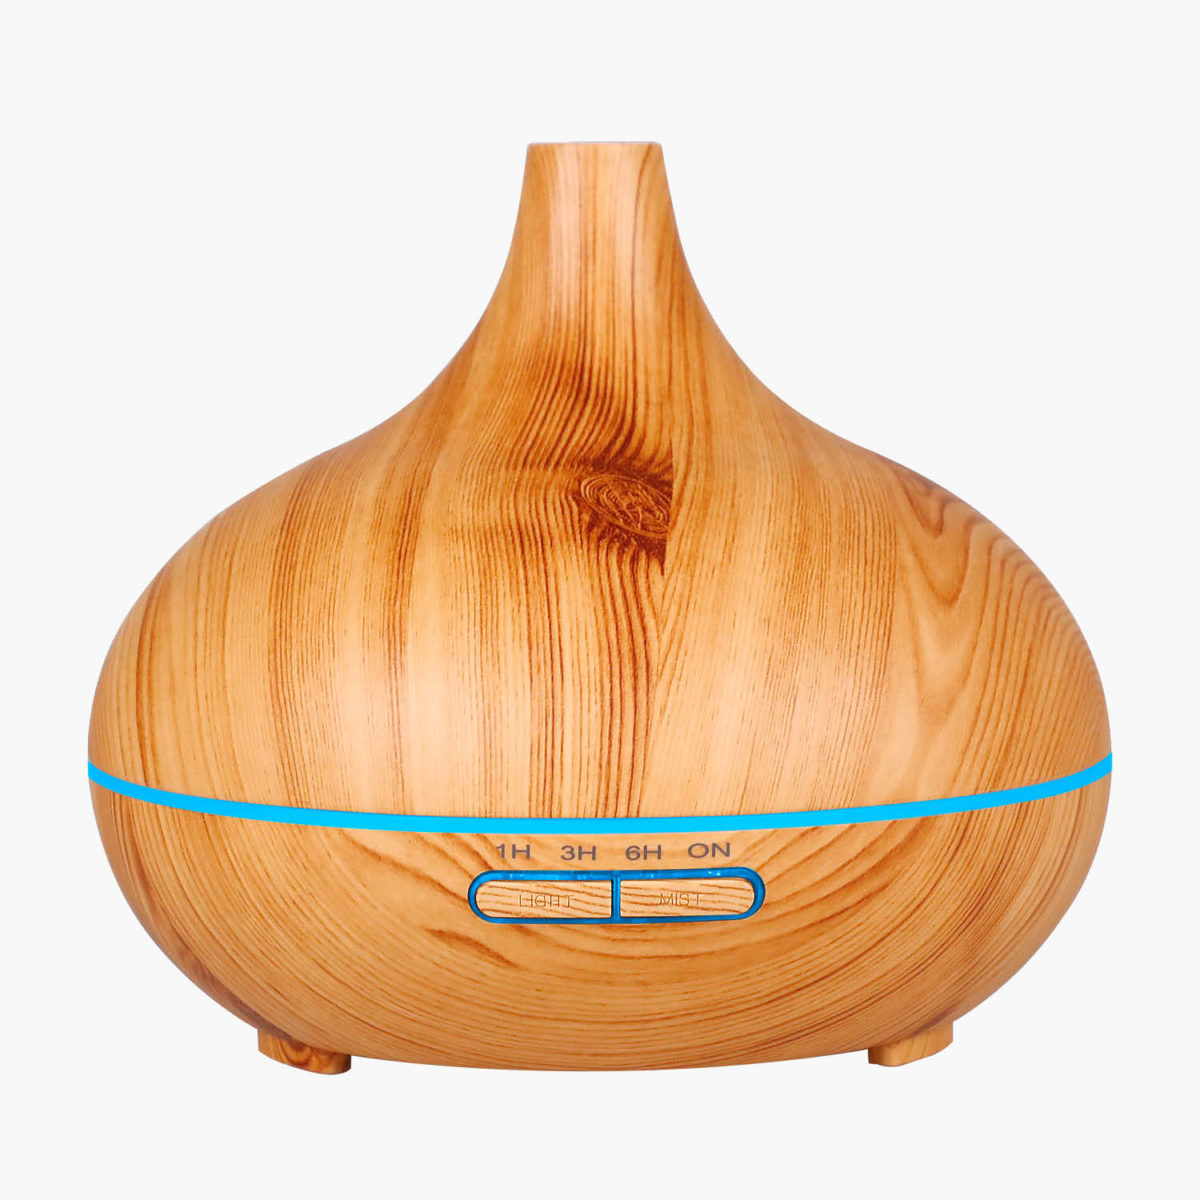 Aroma diffuser - wood print with LED lights